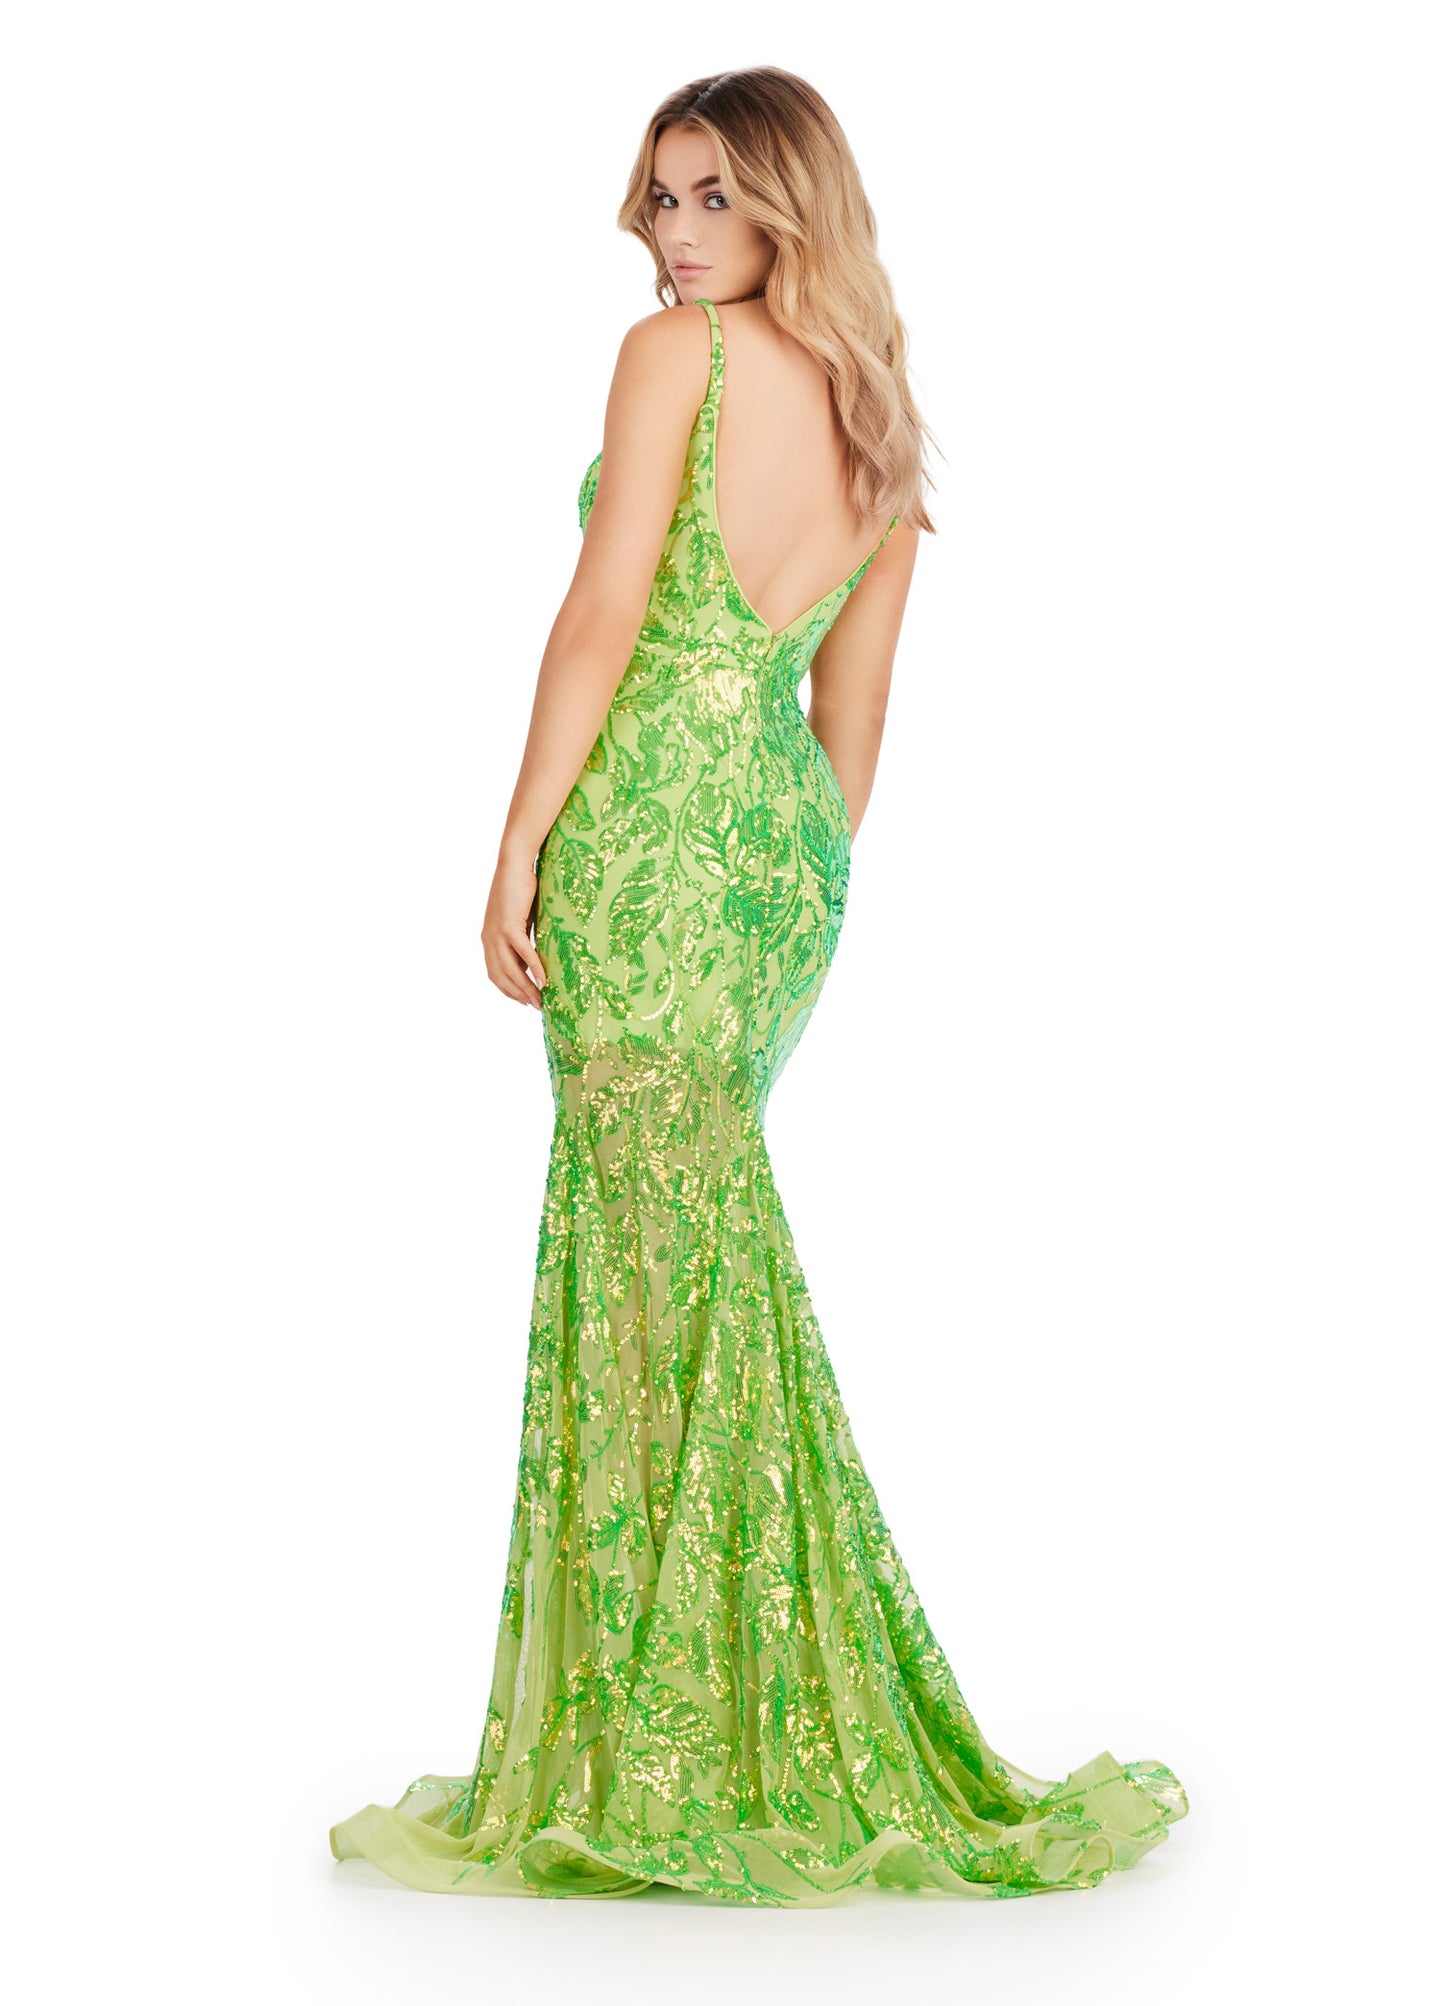 Elevate your prom or pageant look with the Ashley Lauren 11444 gown. Featuring a dazzling sequin design, spaghetti straps, and a low back, this formal dress is sure to turn heads. Its long length adds elegance, while the spaghetti straps provide comfort and support. Make a statement with this stunning gown. Look like royalty in this fully sequin gown! From its elegant top, open back and flare skirt, this gown has it all!